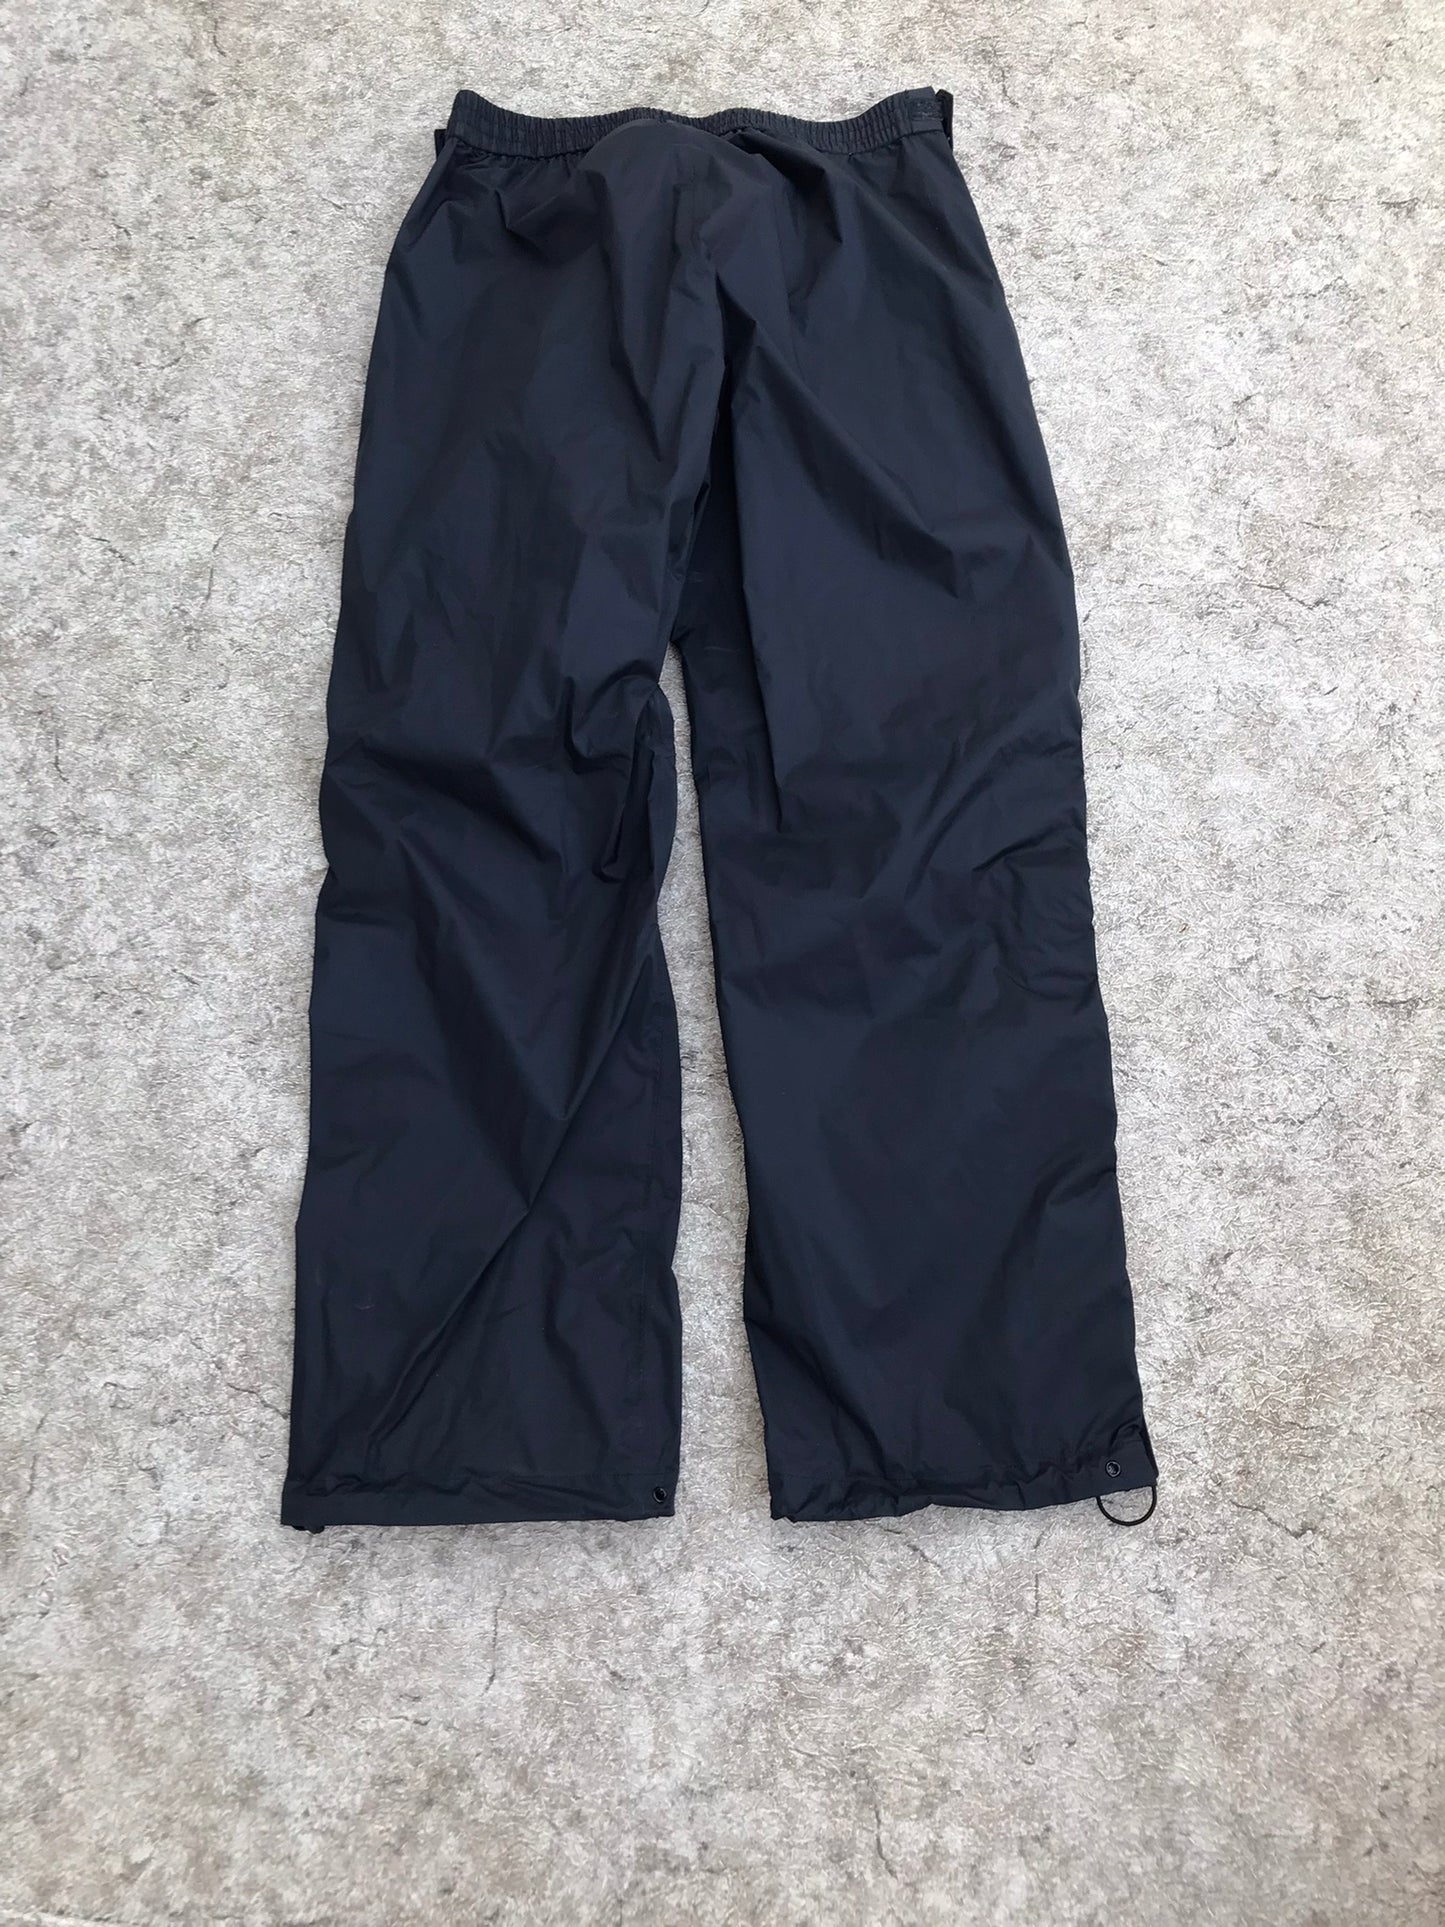 Rain Pants Ladies Size Large MEC Black Waterproof With Full Zippers Up Each Side Great For Hikes, Bikes, Motorcycles, New Demo Model